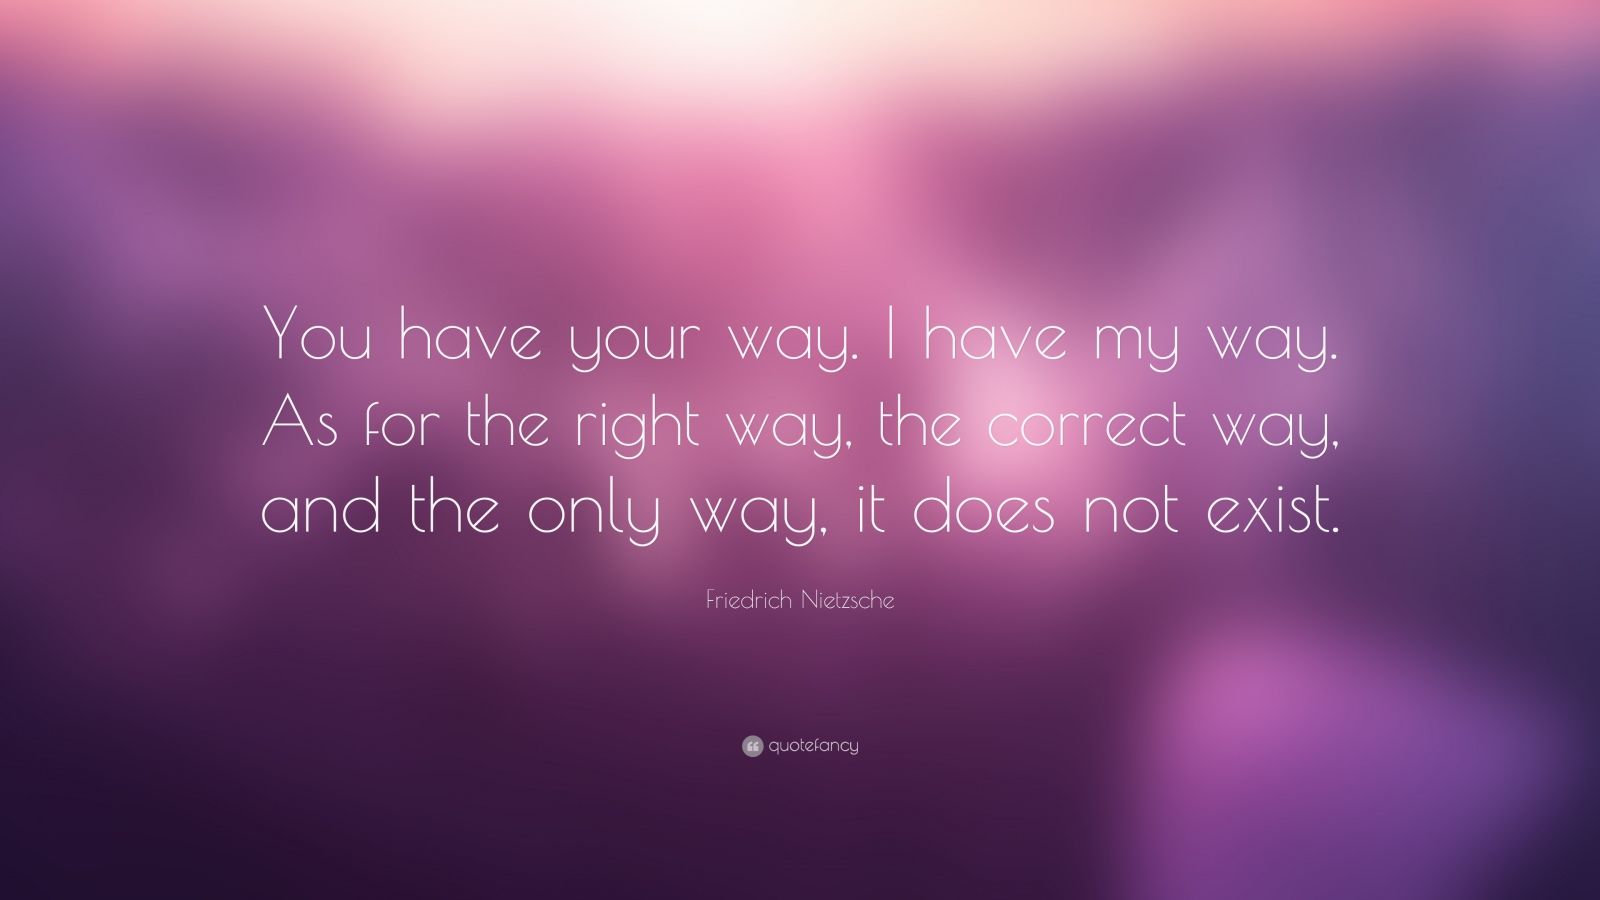 Friedrich Nietzsche Quote “you Have Your Way I Have My Way As For